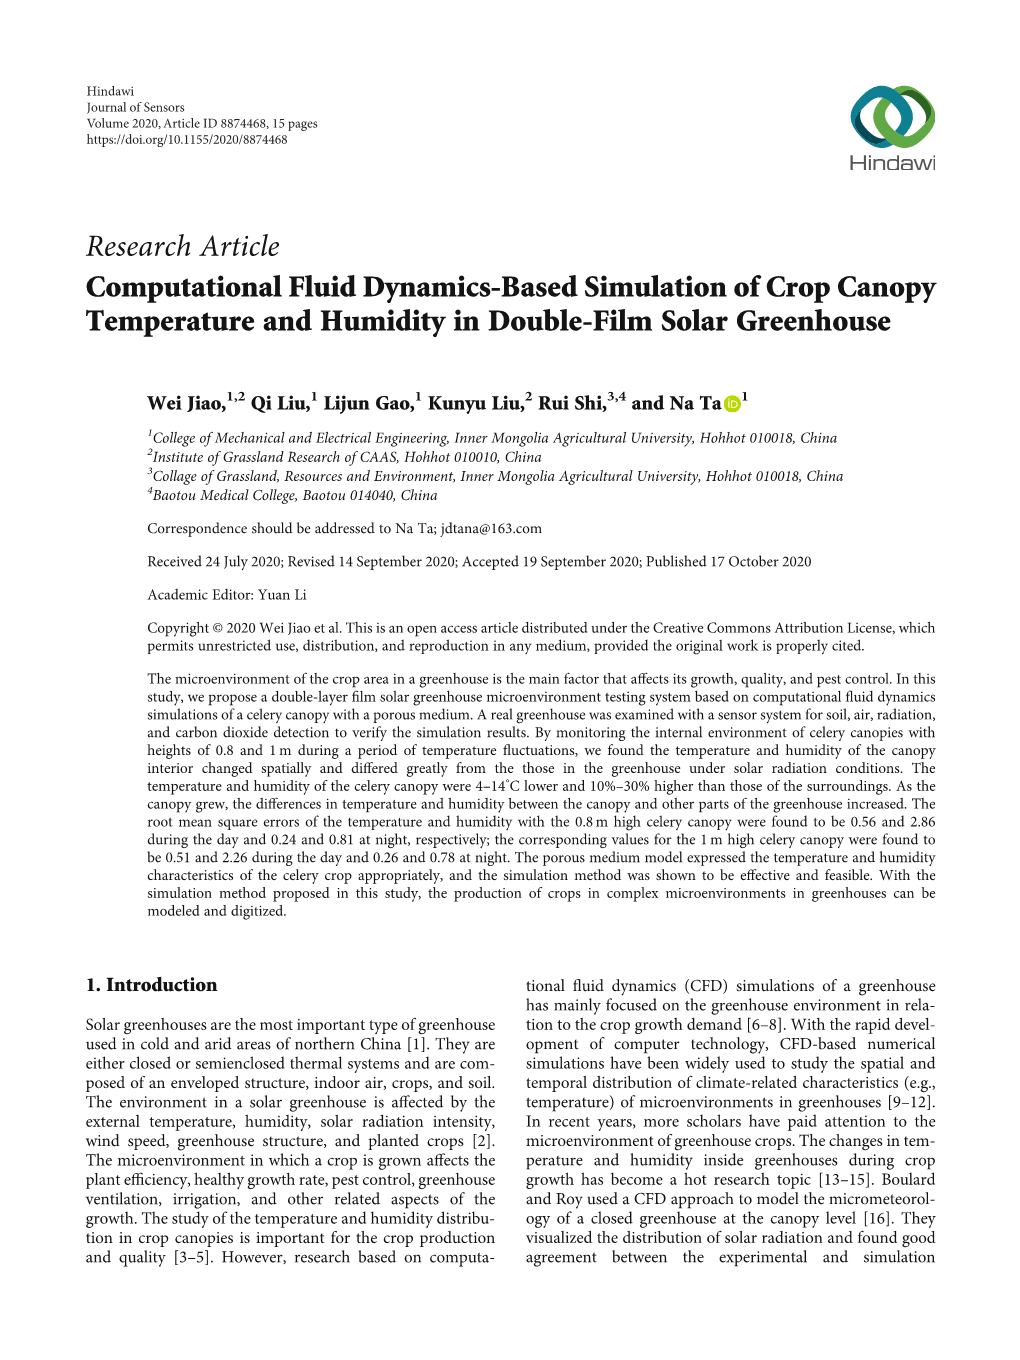 Computational Fluid Dynamics-Based Simulation of Crop Canopy Temperature and Humidity in Double-Film Solar Greenhouse